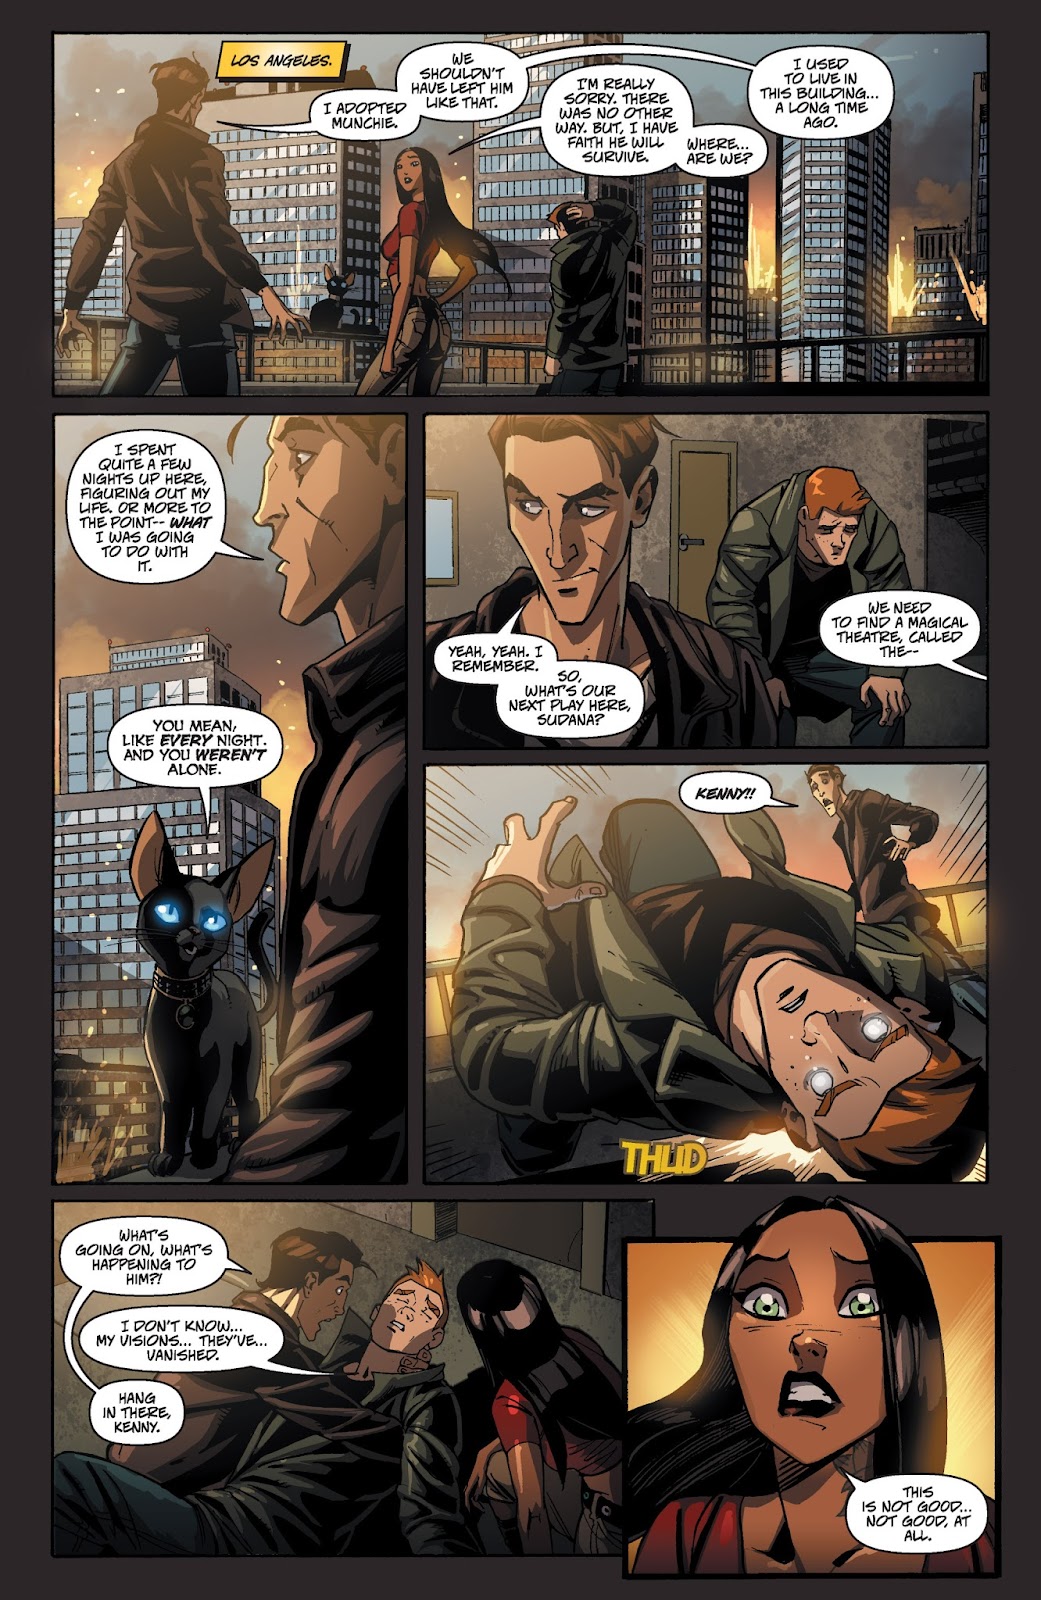 Charismagic (2013) issue 1 - Page 20